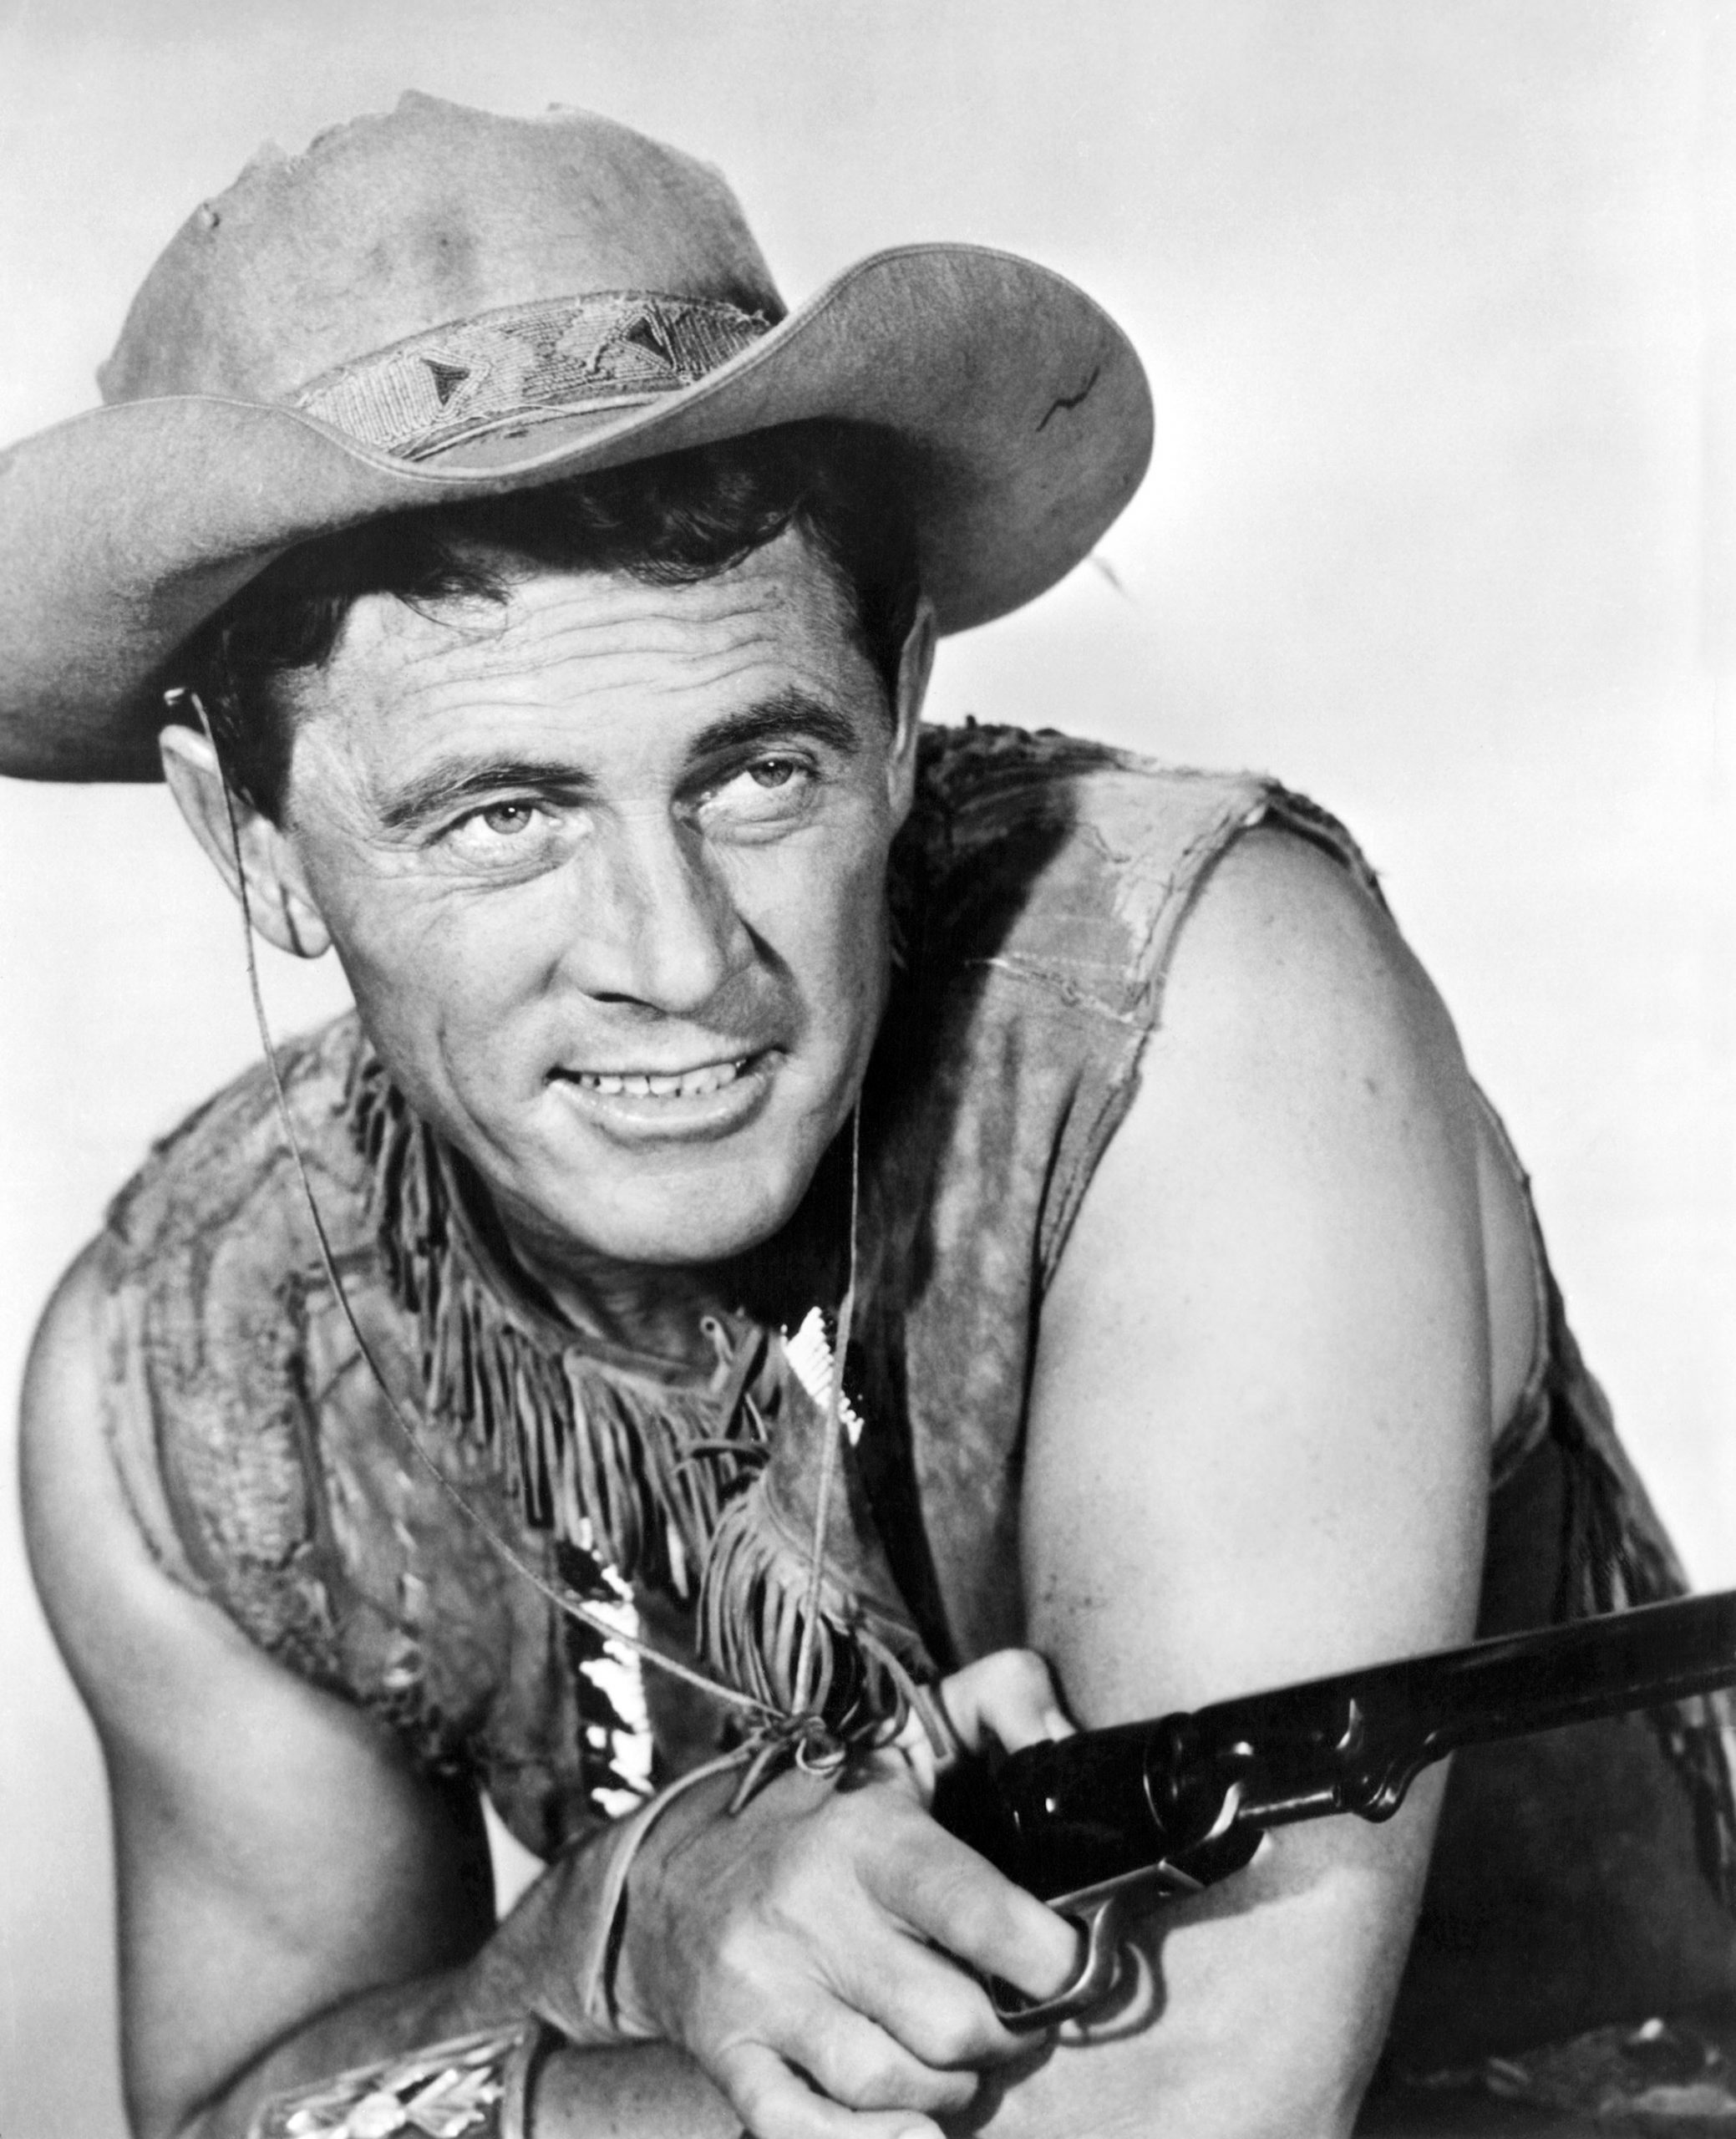 Ken Curtis was practically born to be a Western star